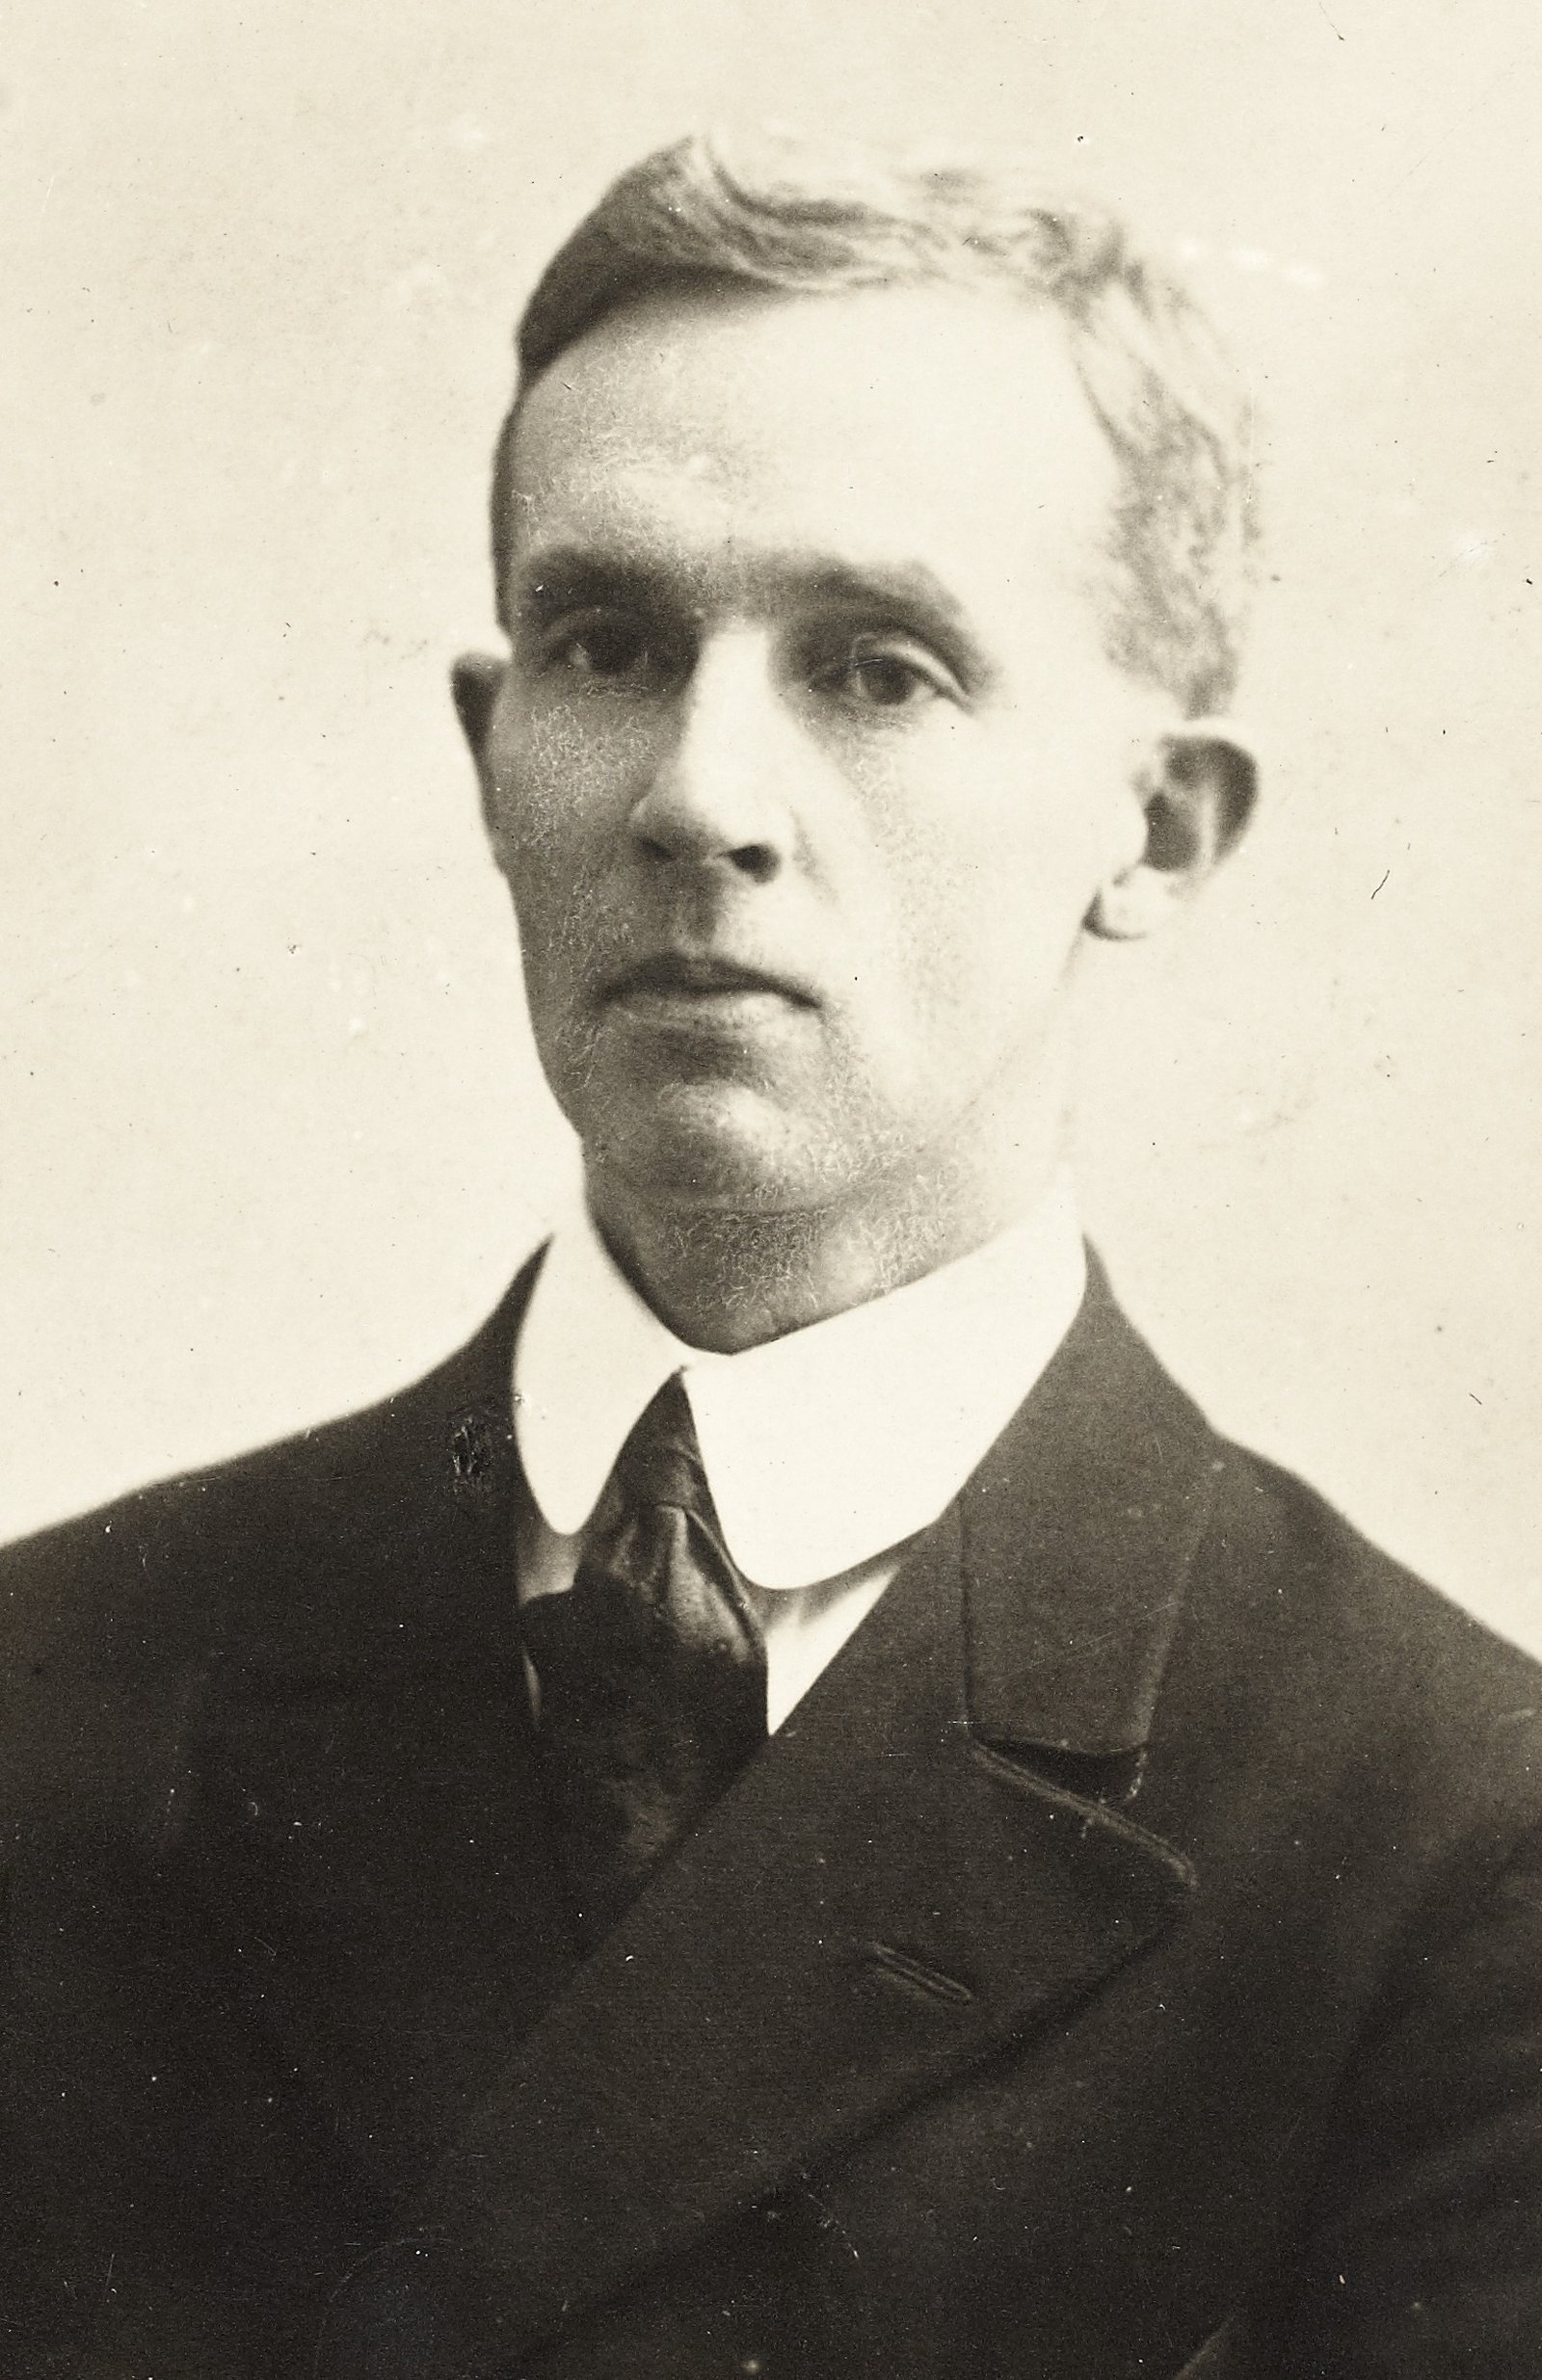 Image - Erskine Childers, who was executed under the new draconian measures. Image courtesy of the National Library of Ireland